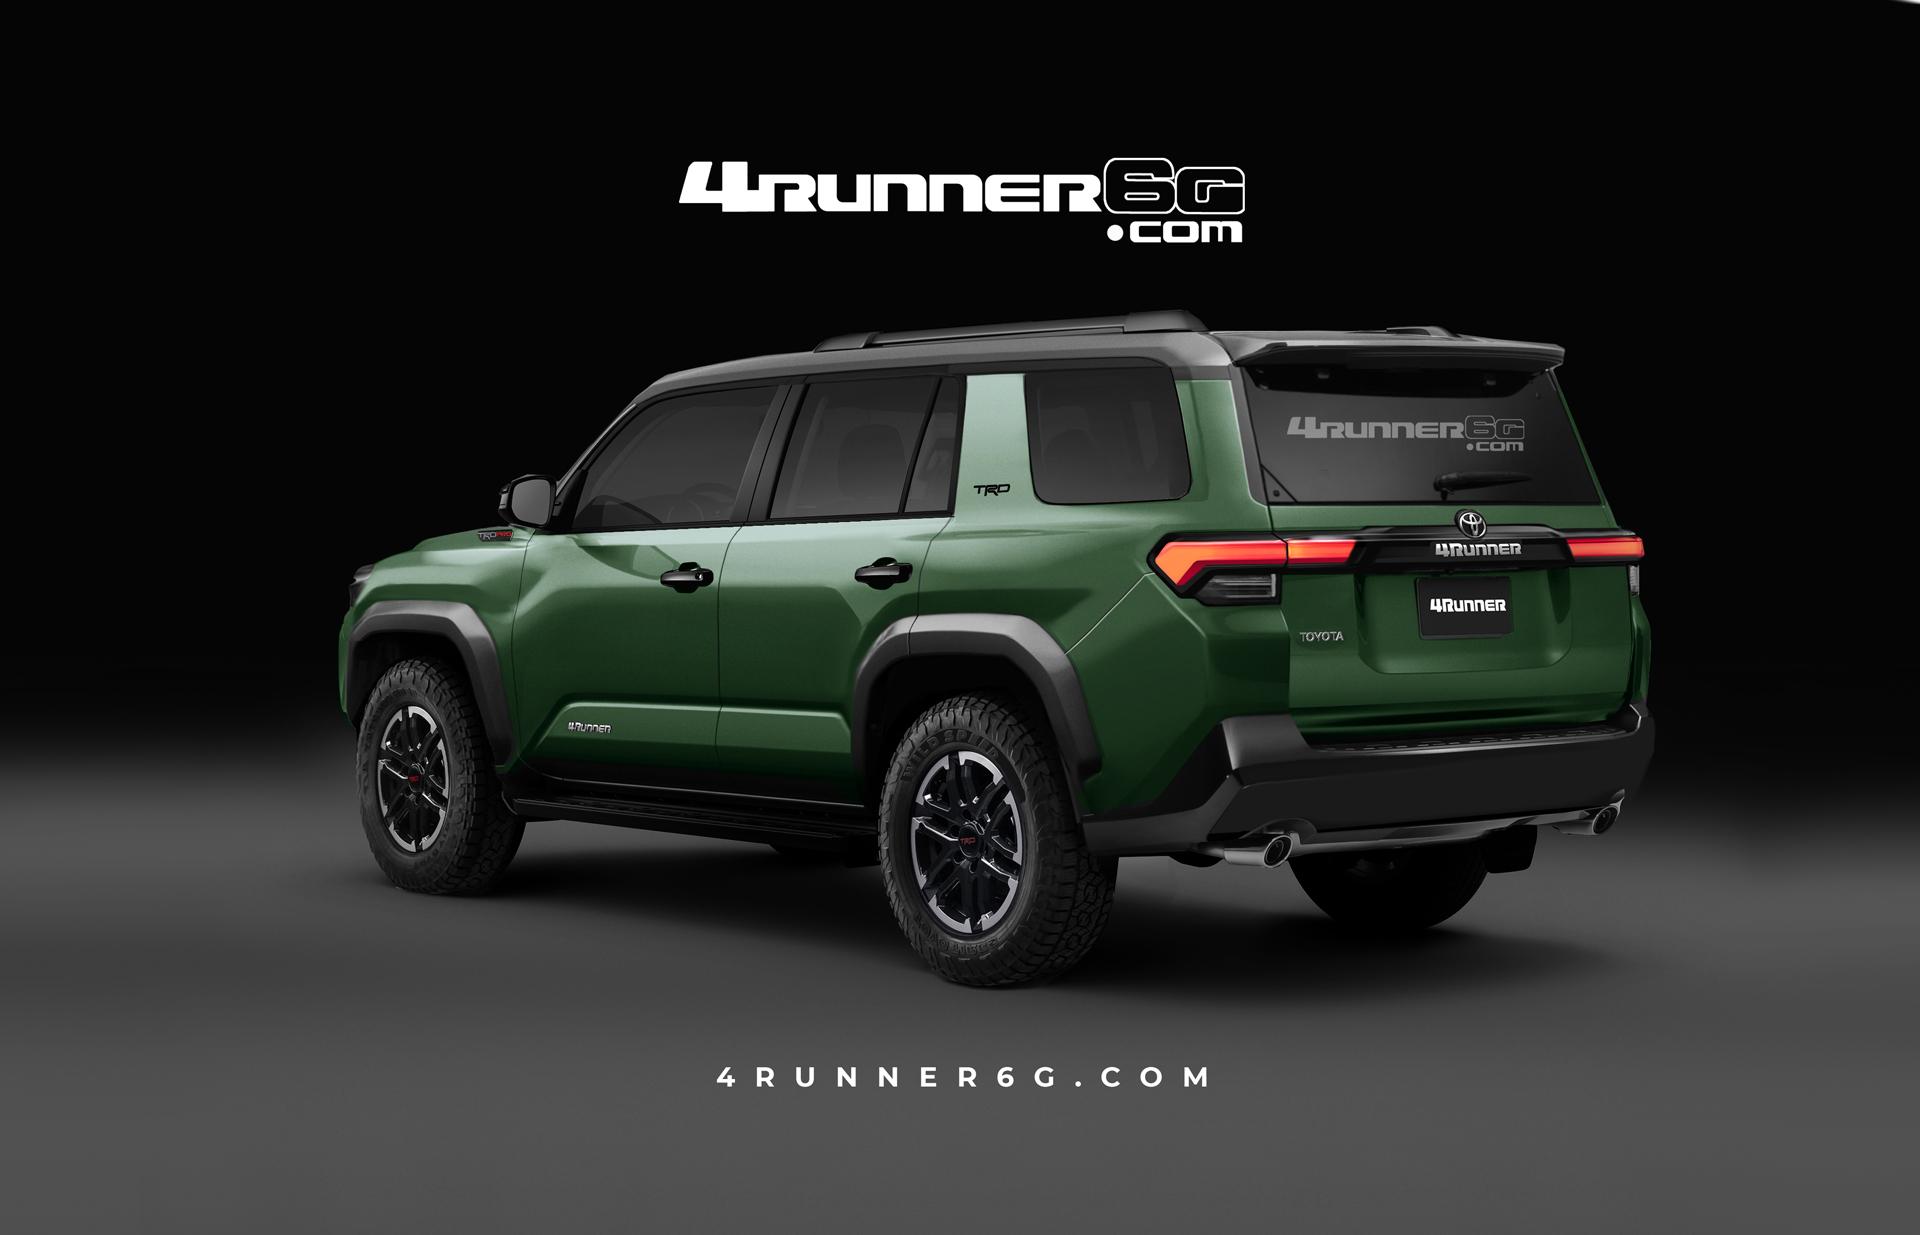 2025 Toyota 4runner 2025 4Runner (6th Gen) News, Specs, Engines, Release Date, Production Date & Preview Renderings -- Insider Info (as of 7/30/23) 2025 Toyota-4Runner-Rear-S-Army-green